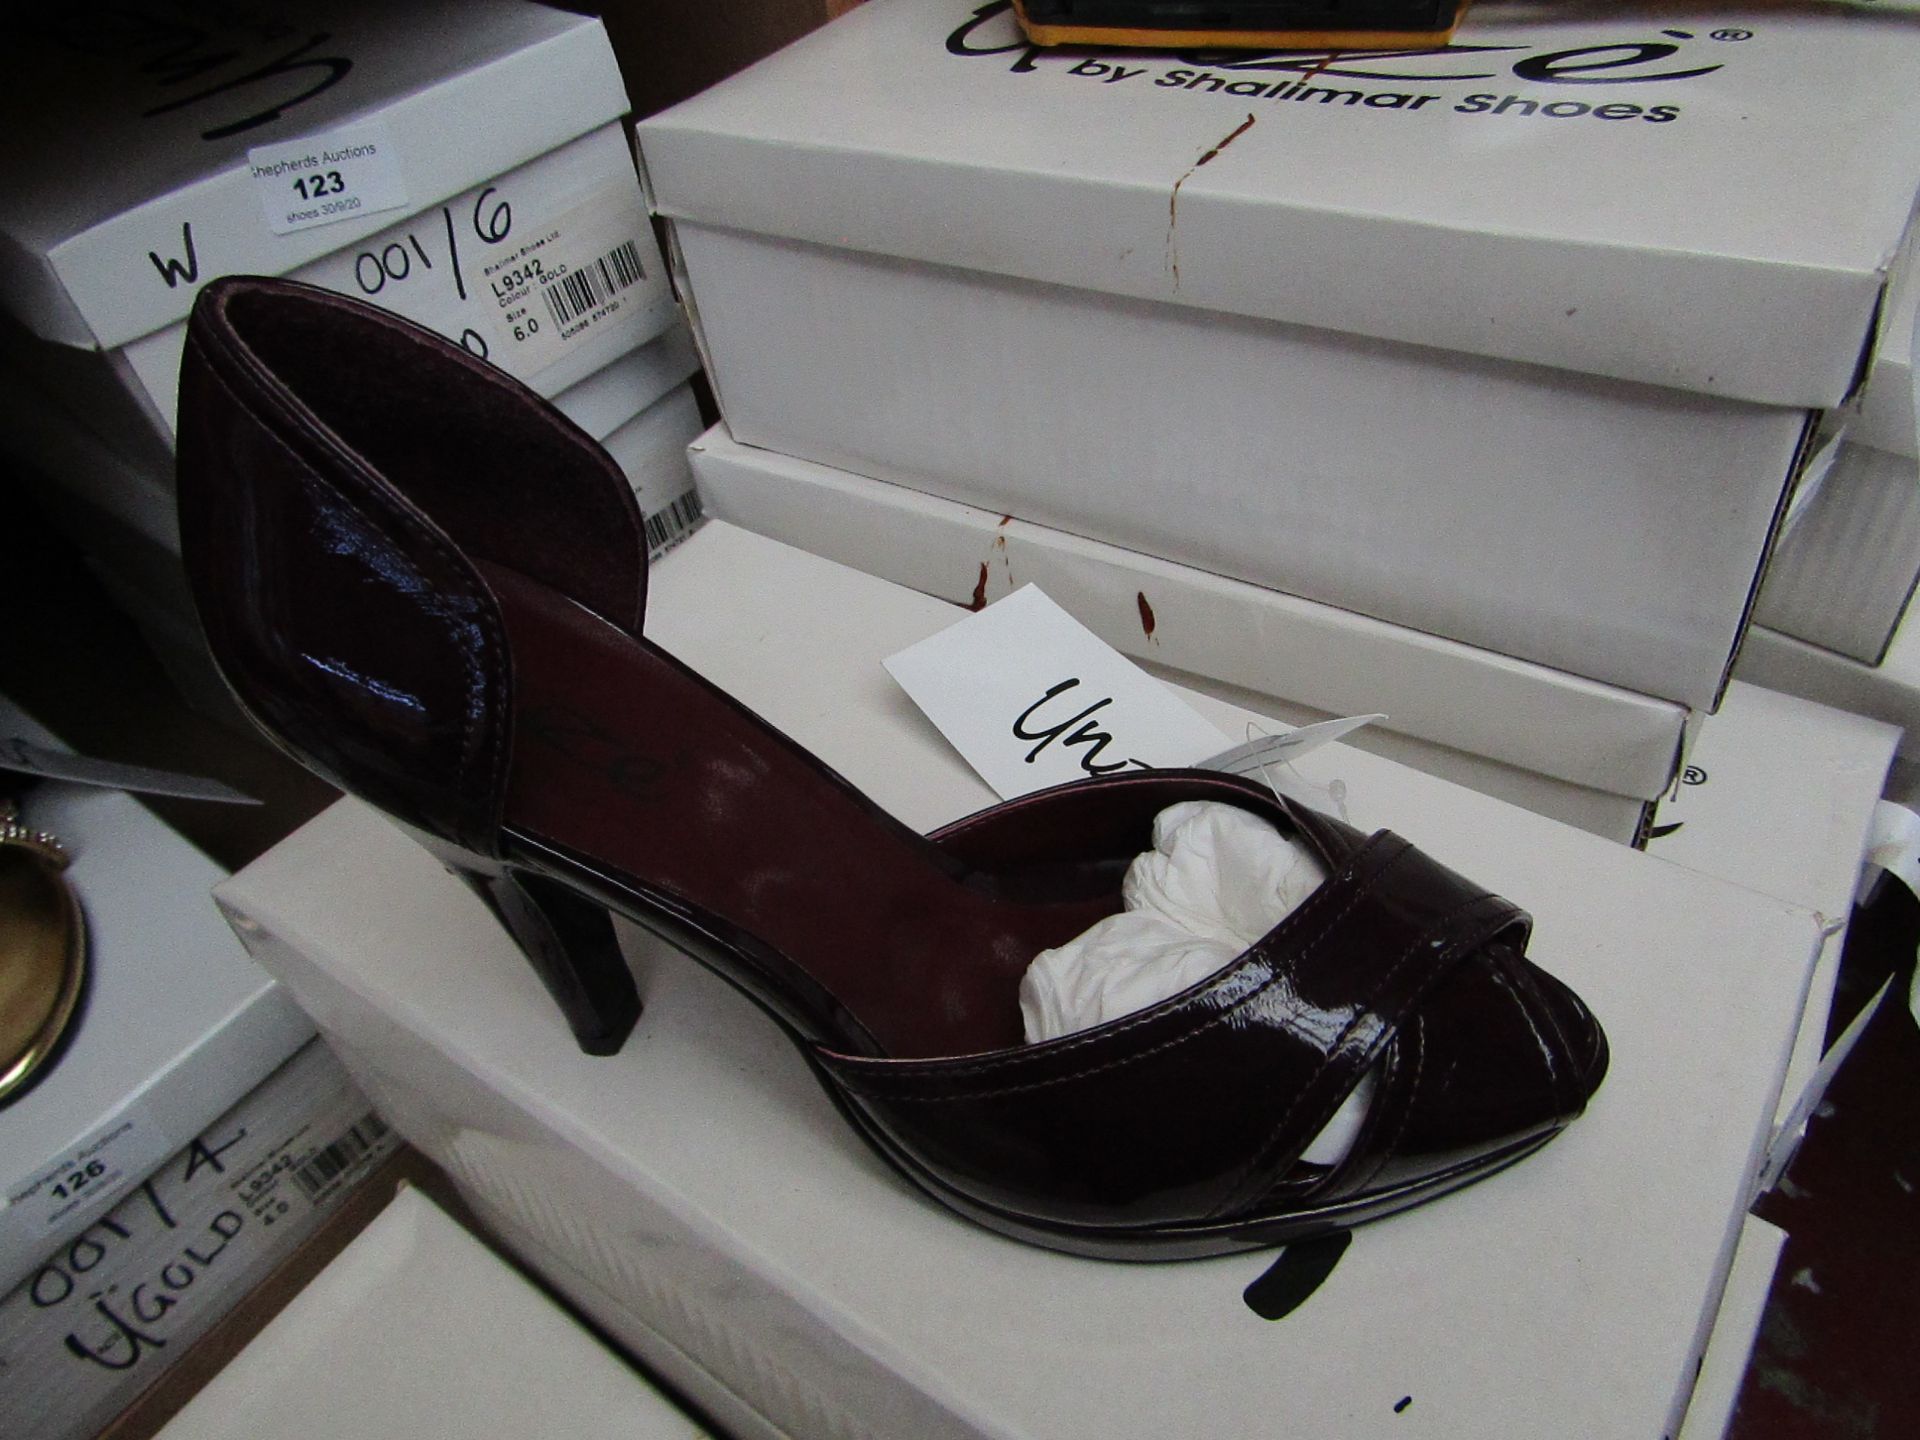 Unze by Shalimar Shoes Brown Patent Ladies Shoes size 4 new & boxed see image for design